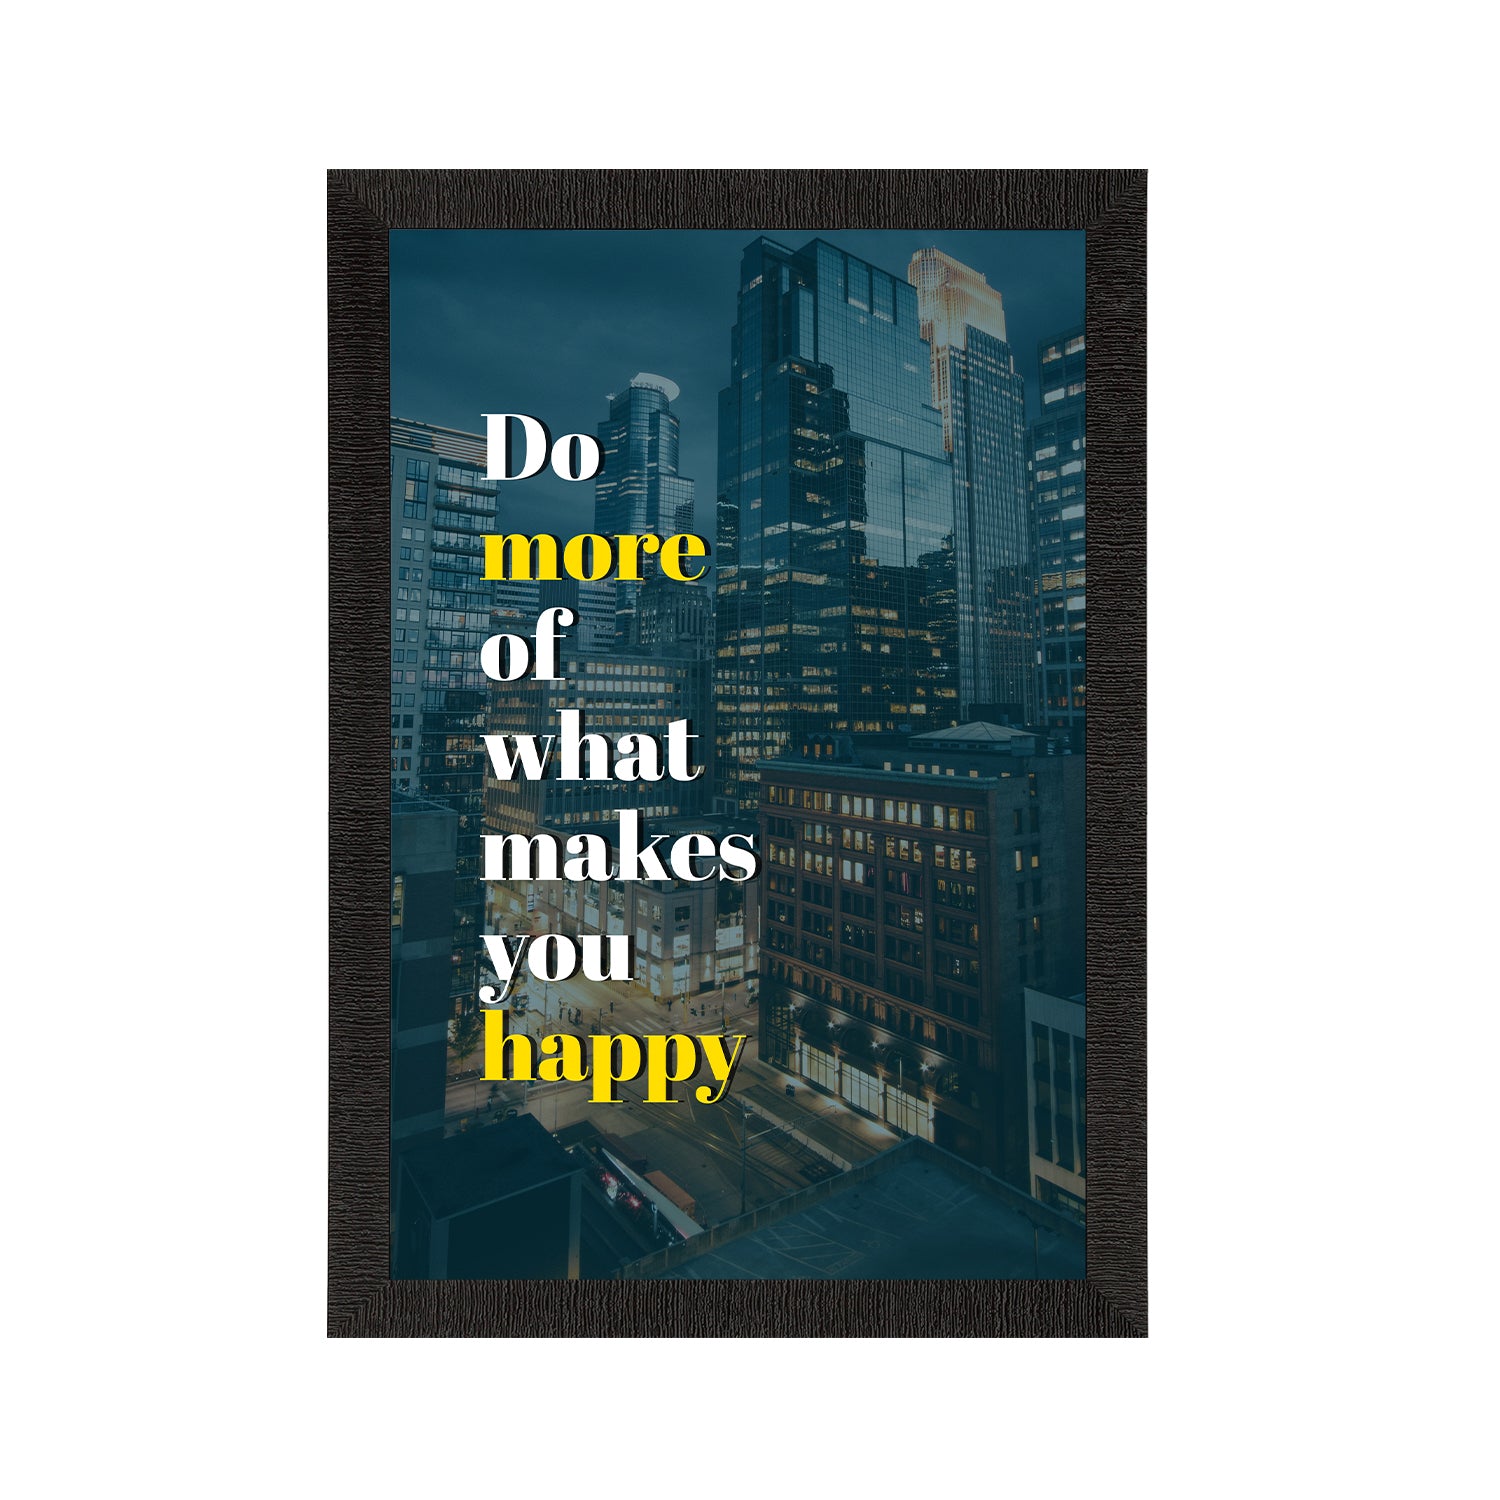 "Do more of what makes you happy" Motivational Quote Satin Matt Texture UV Art Painting